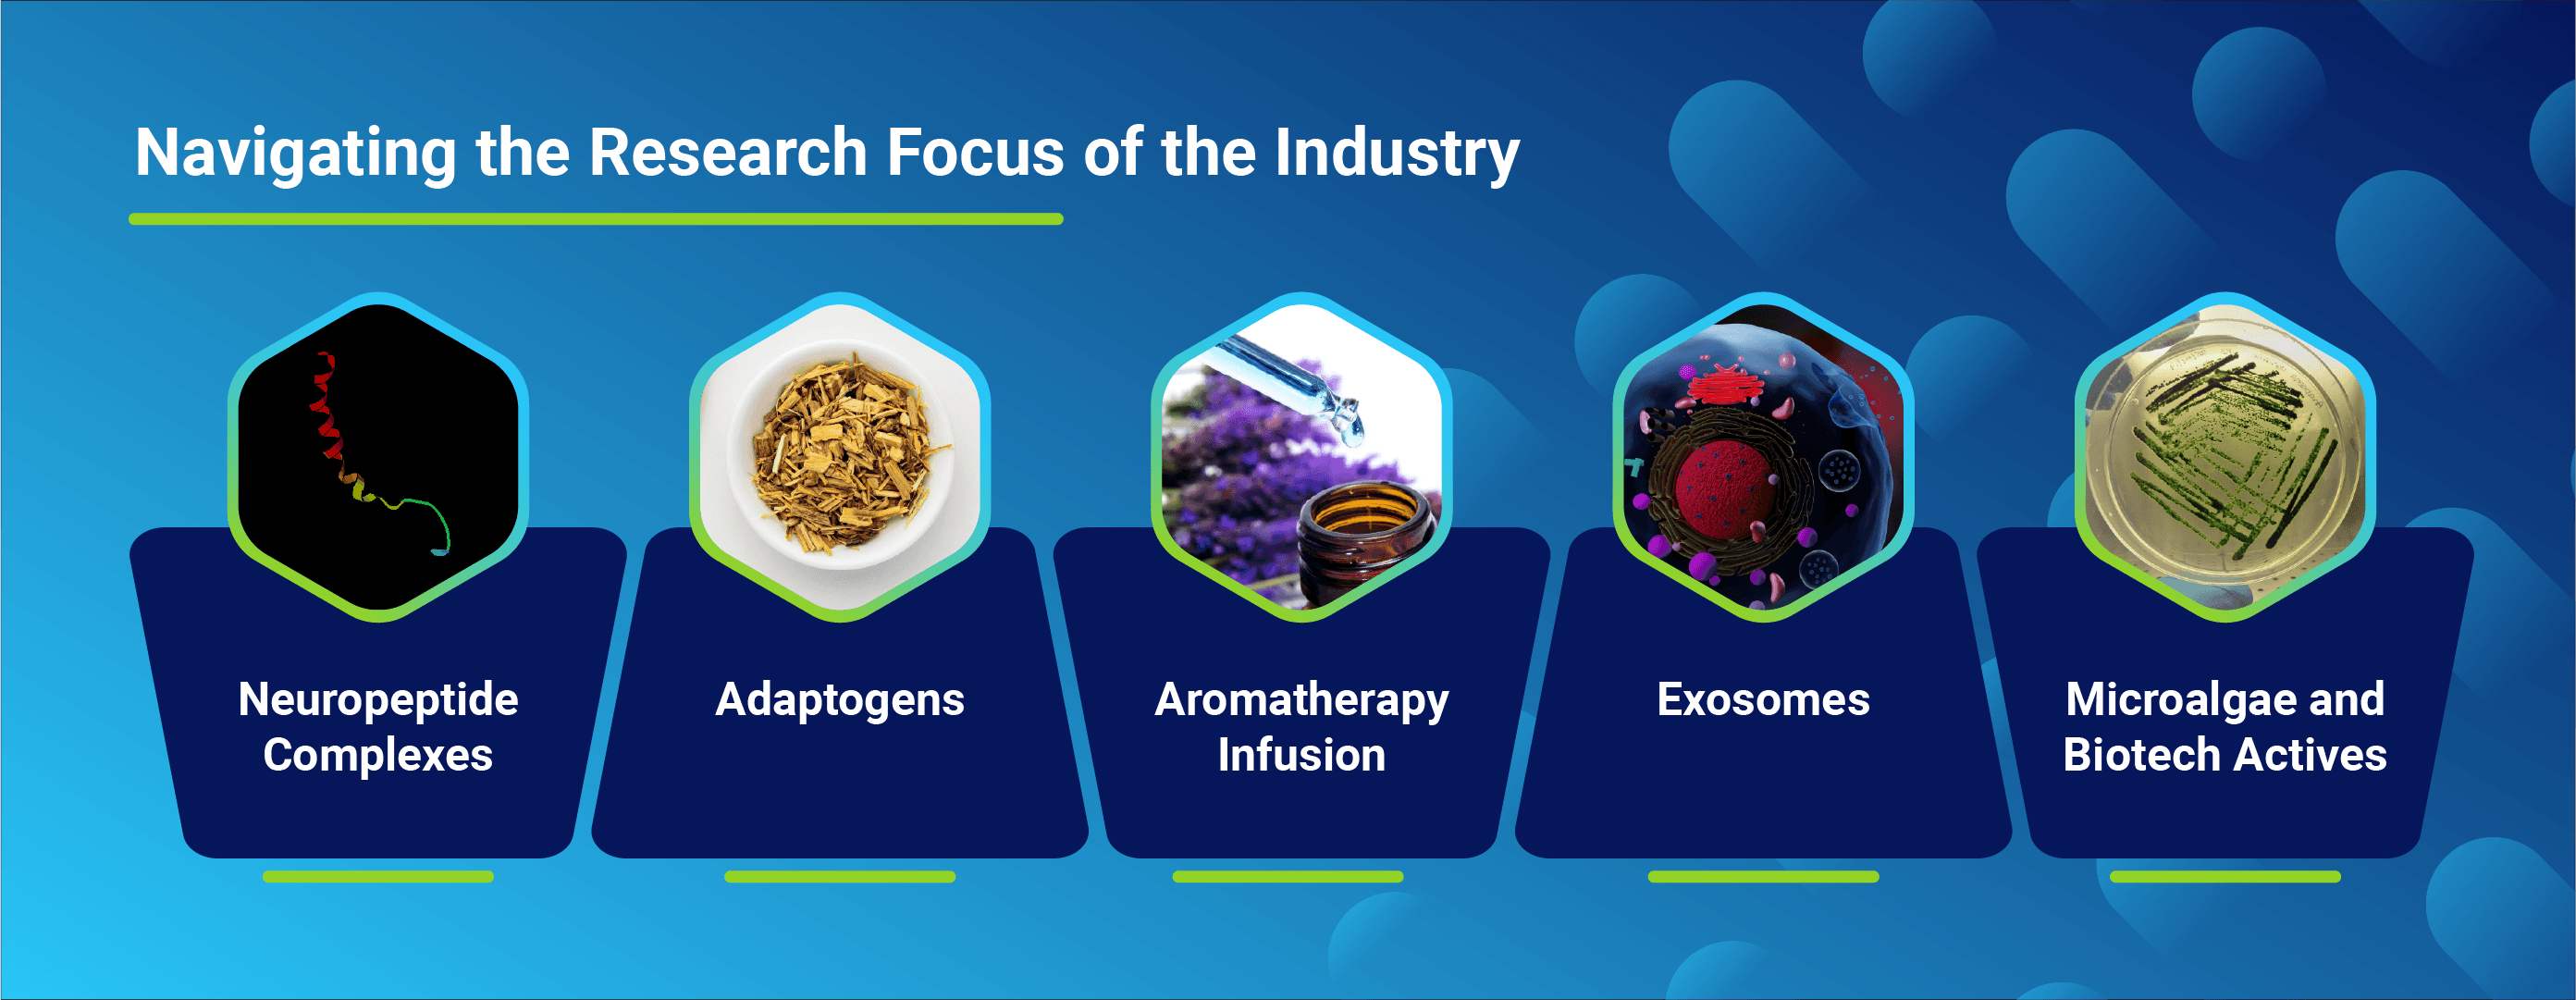 Navigating the research focus of the industry